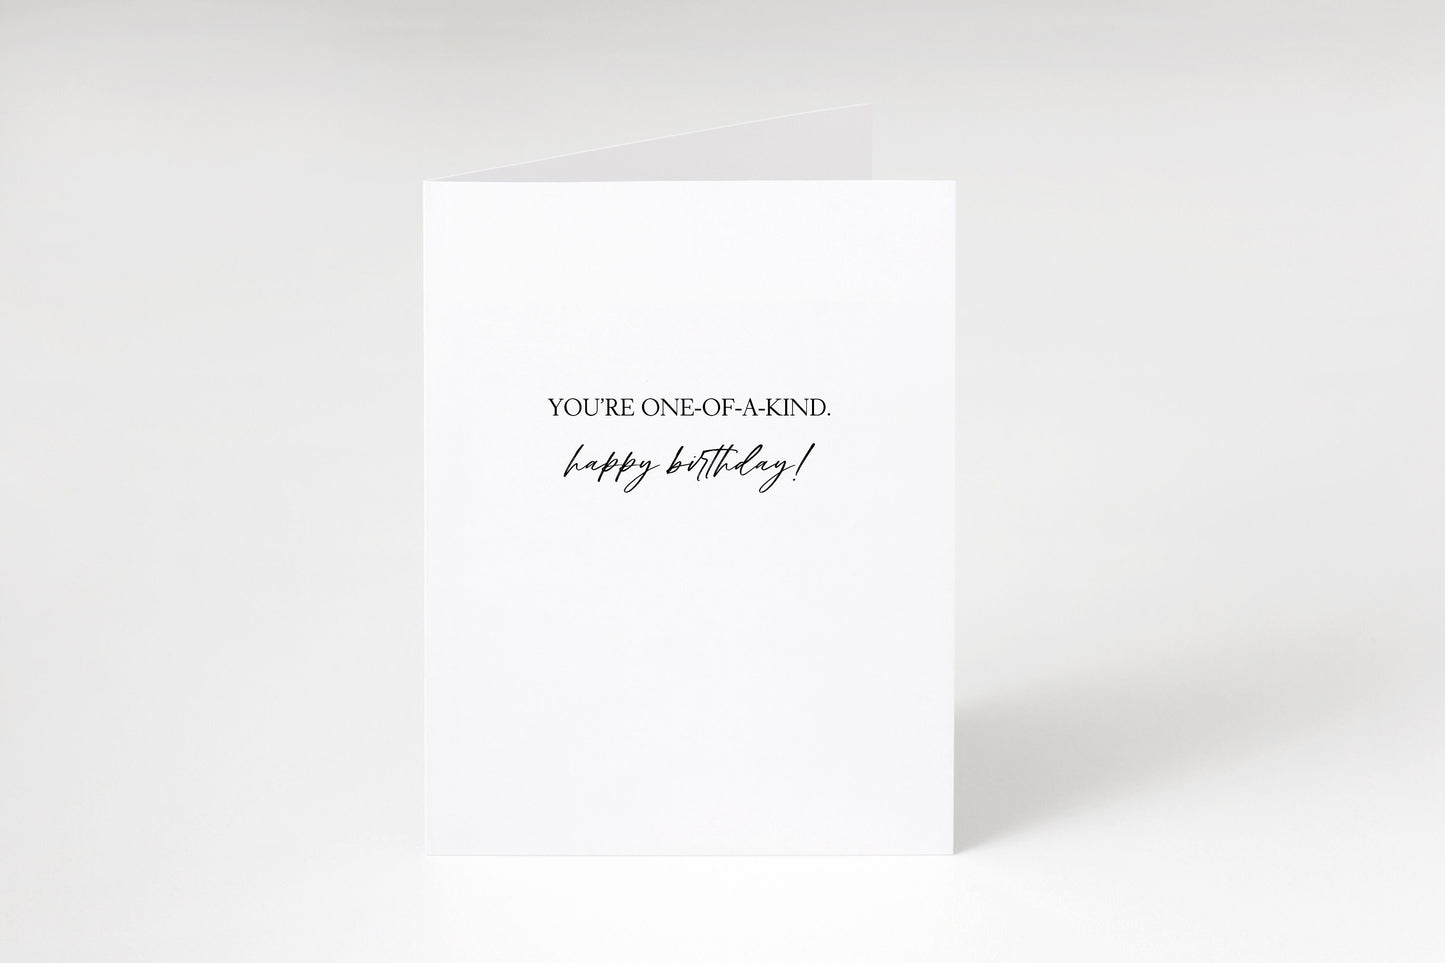 You’re one of a kind,Birthday card,Happy Birthday,Simple birthday card,Card for friend,Card for her,Card for him,Happy Birthday card